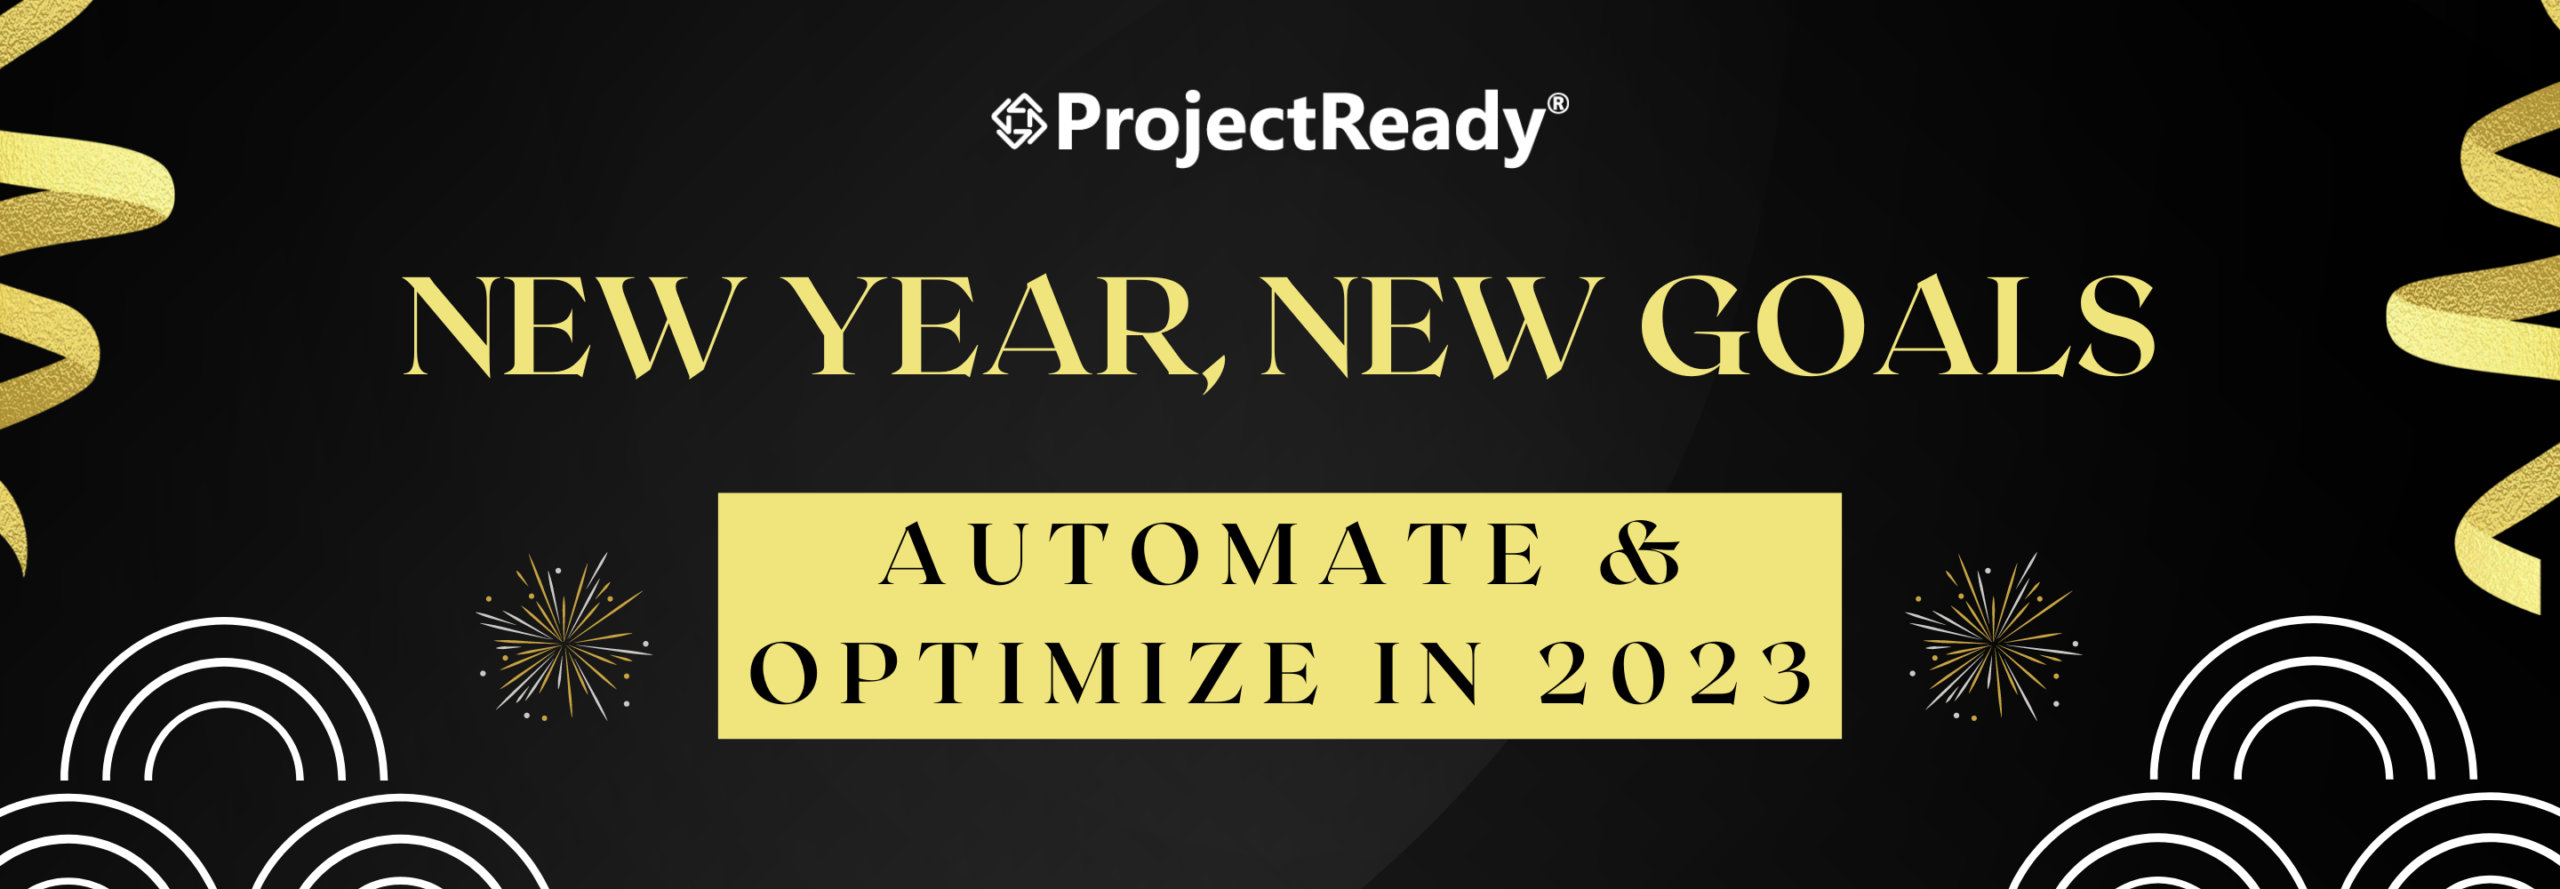 Automate & Optimize In 2023 To Overcome Cost & Productivity Challenges - ProjectReady | ProjectReady